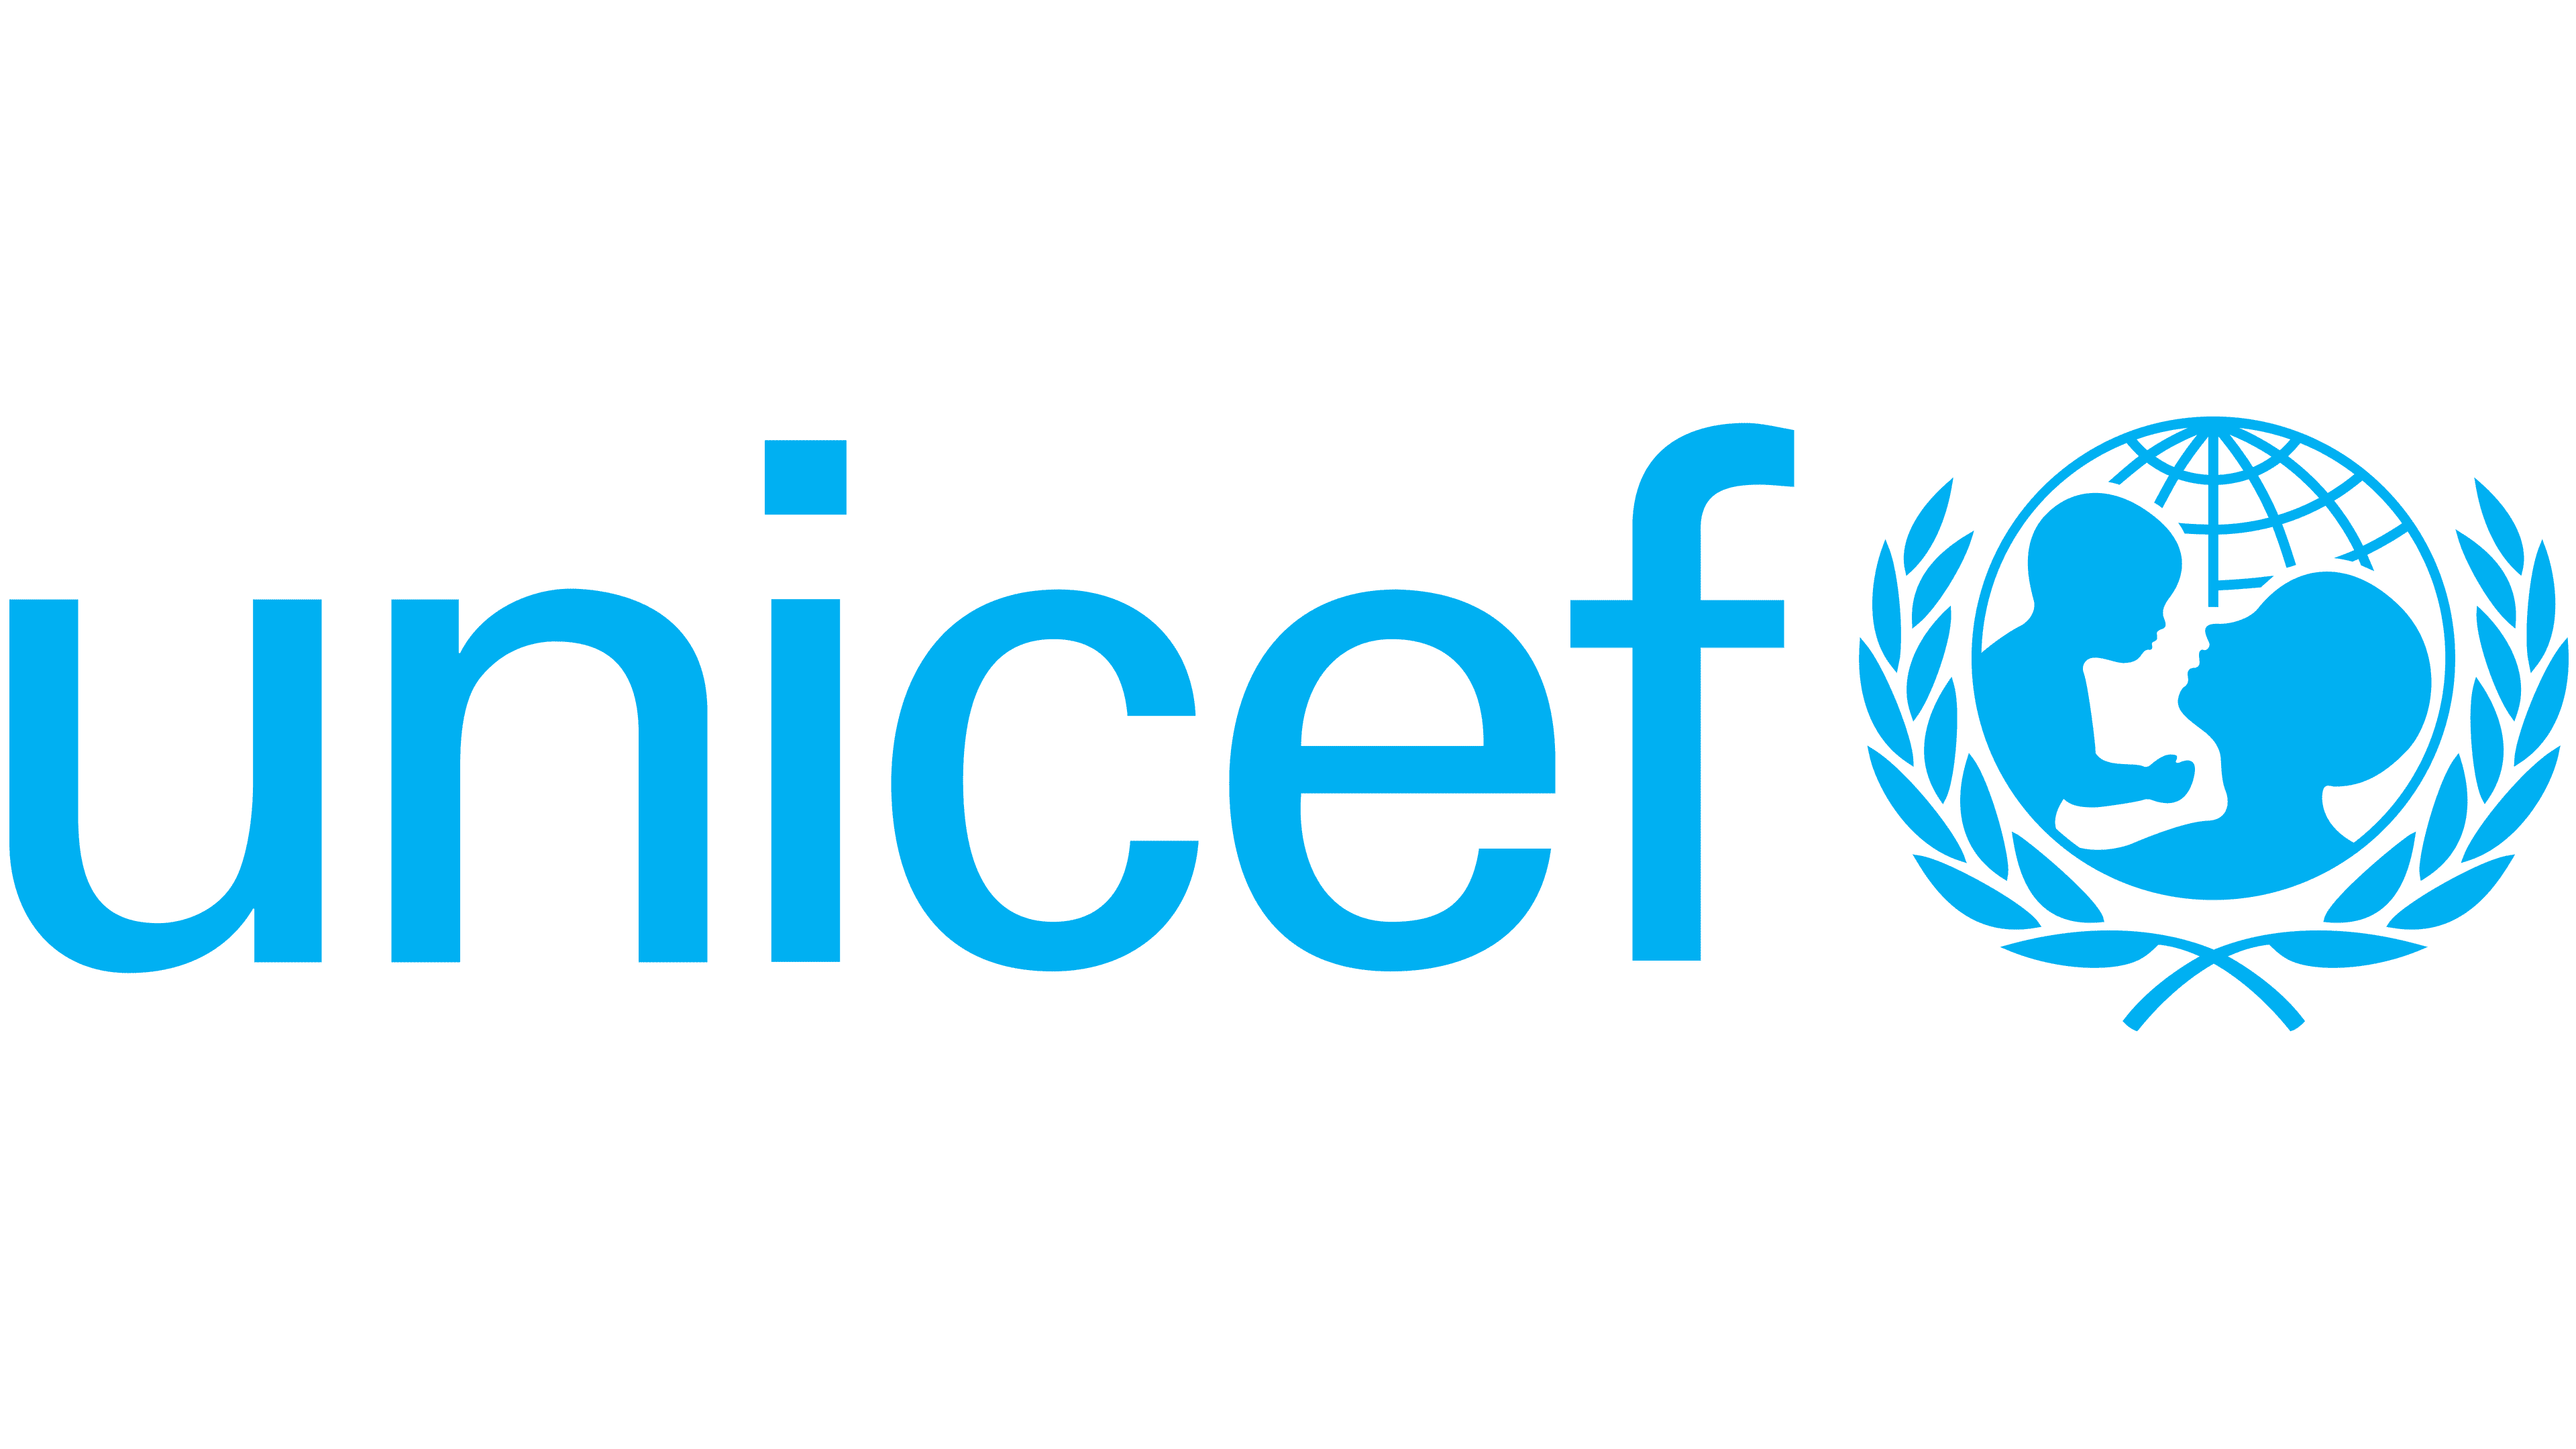 UNICEF: Water, Sanitation and Hygiene cover